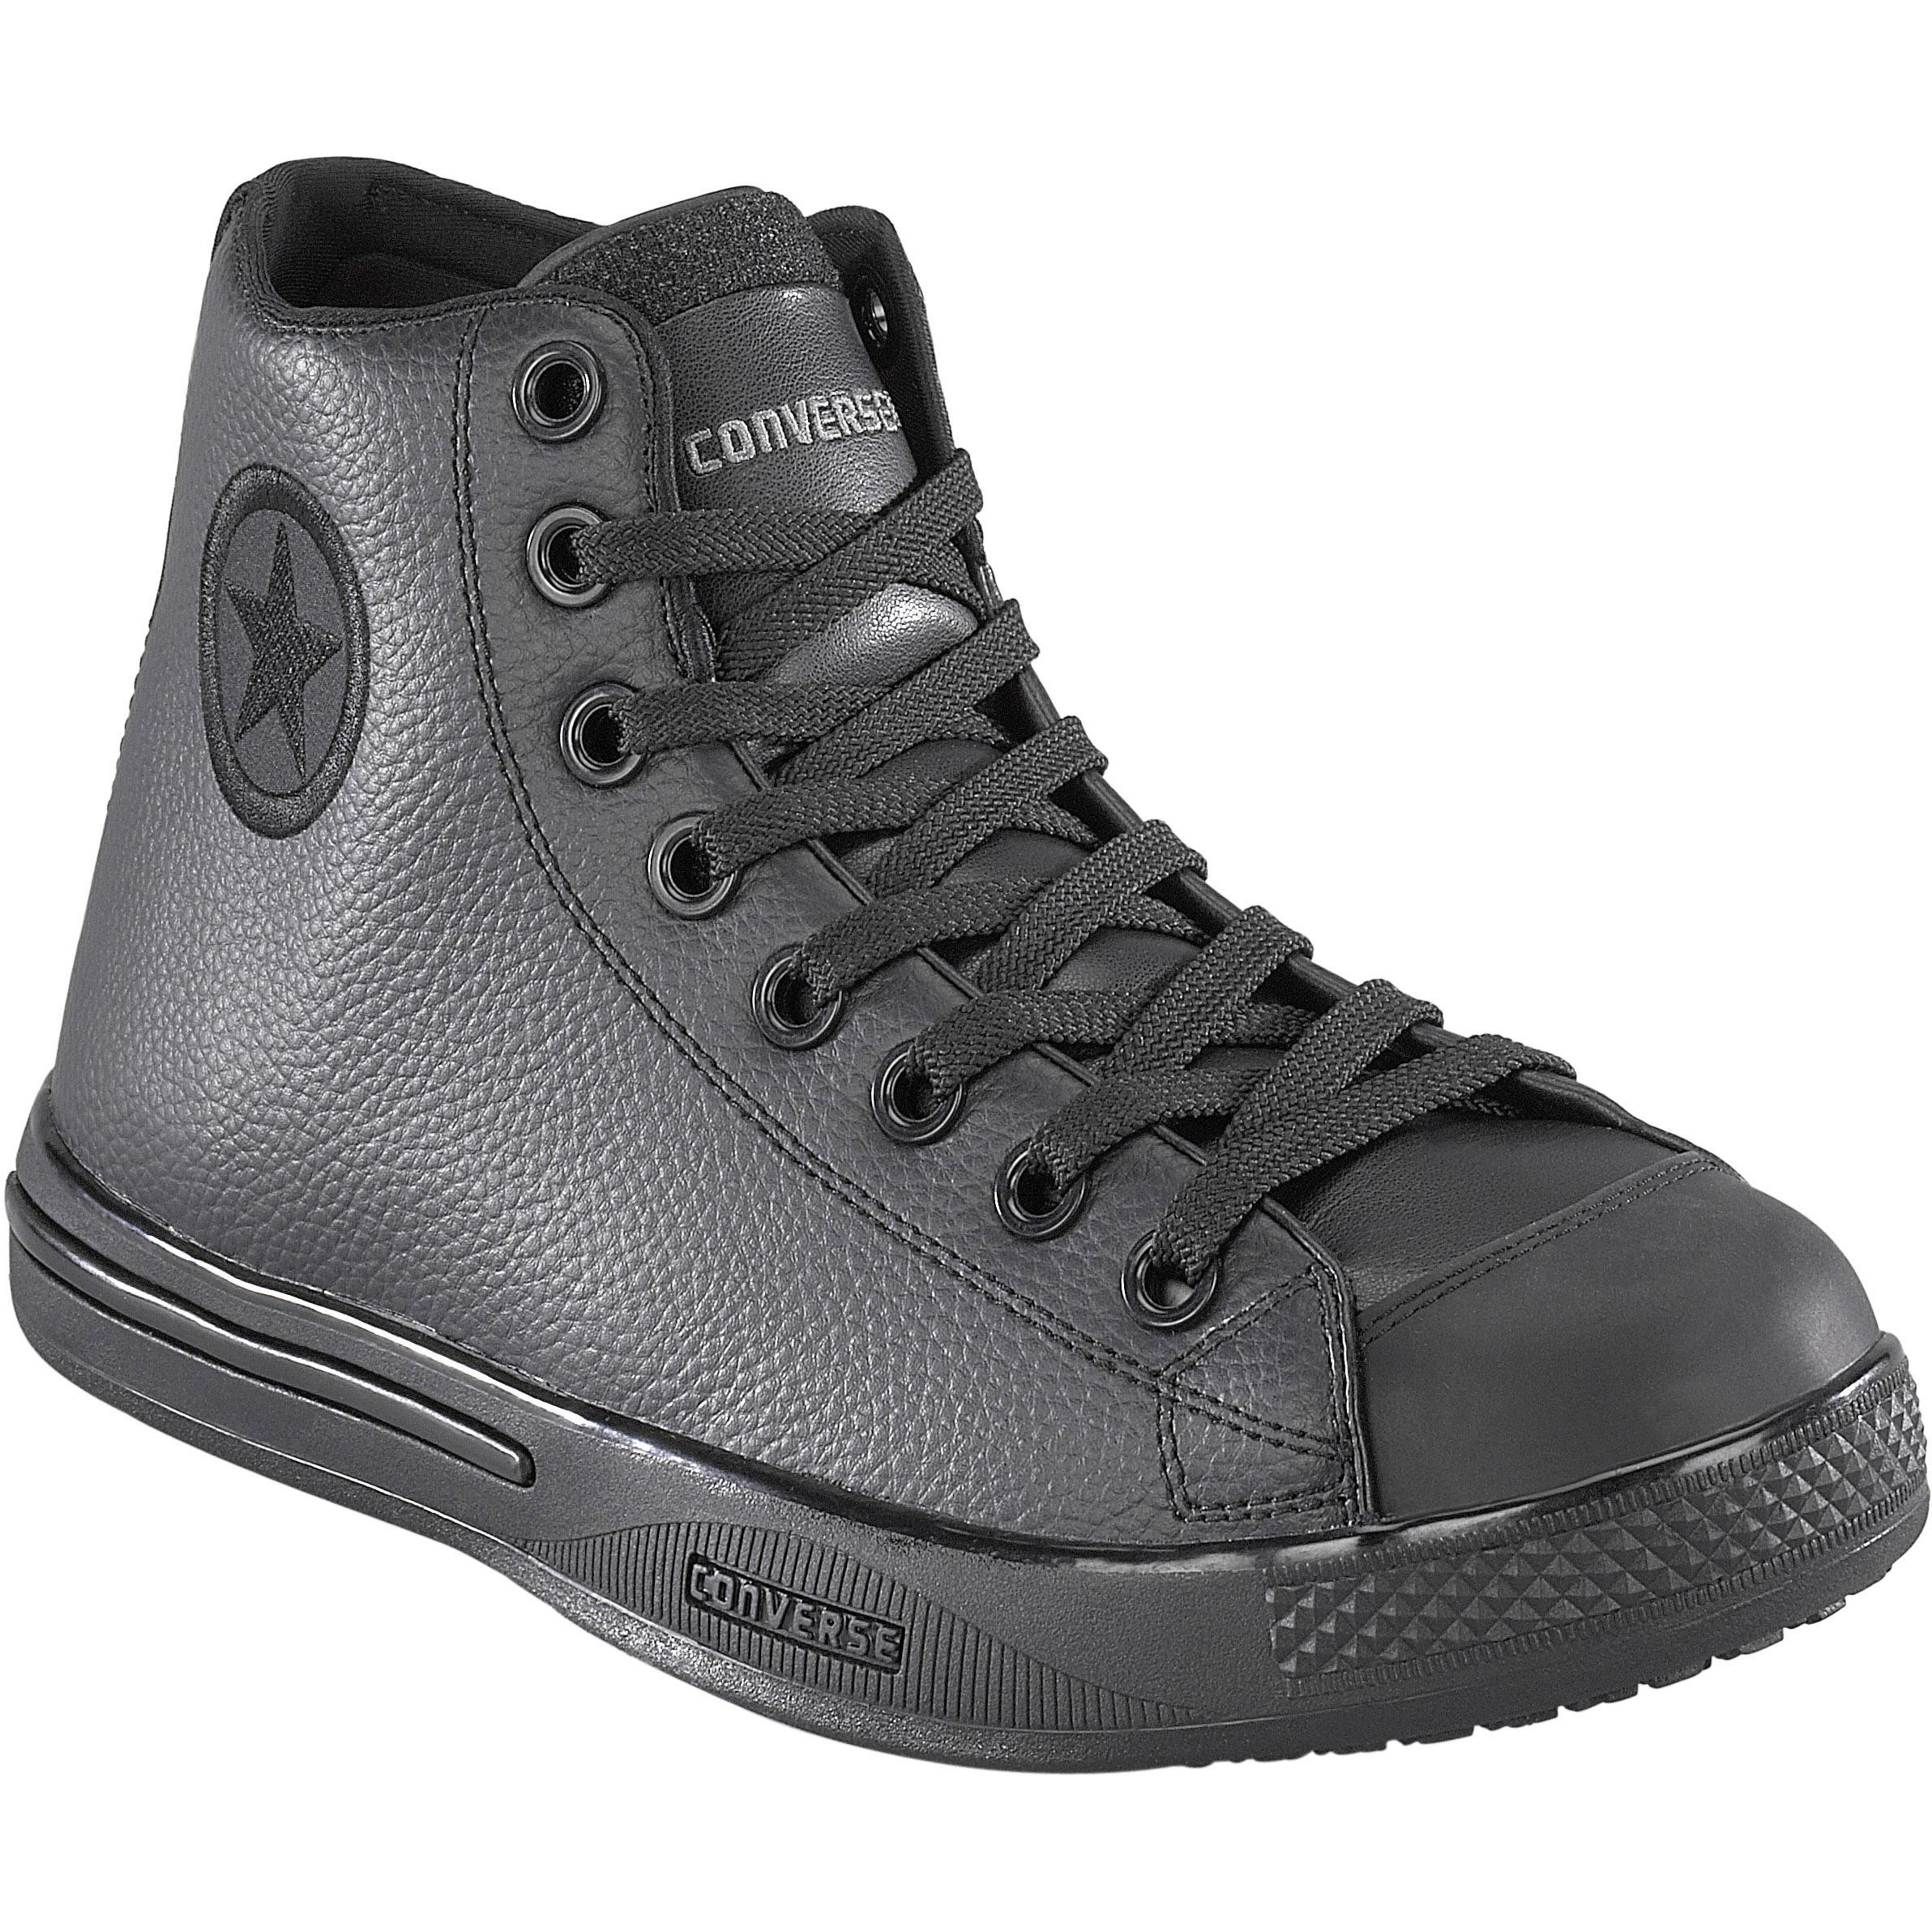 converse kitchen shoes Online Shopping 